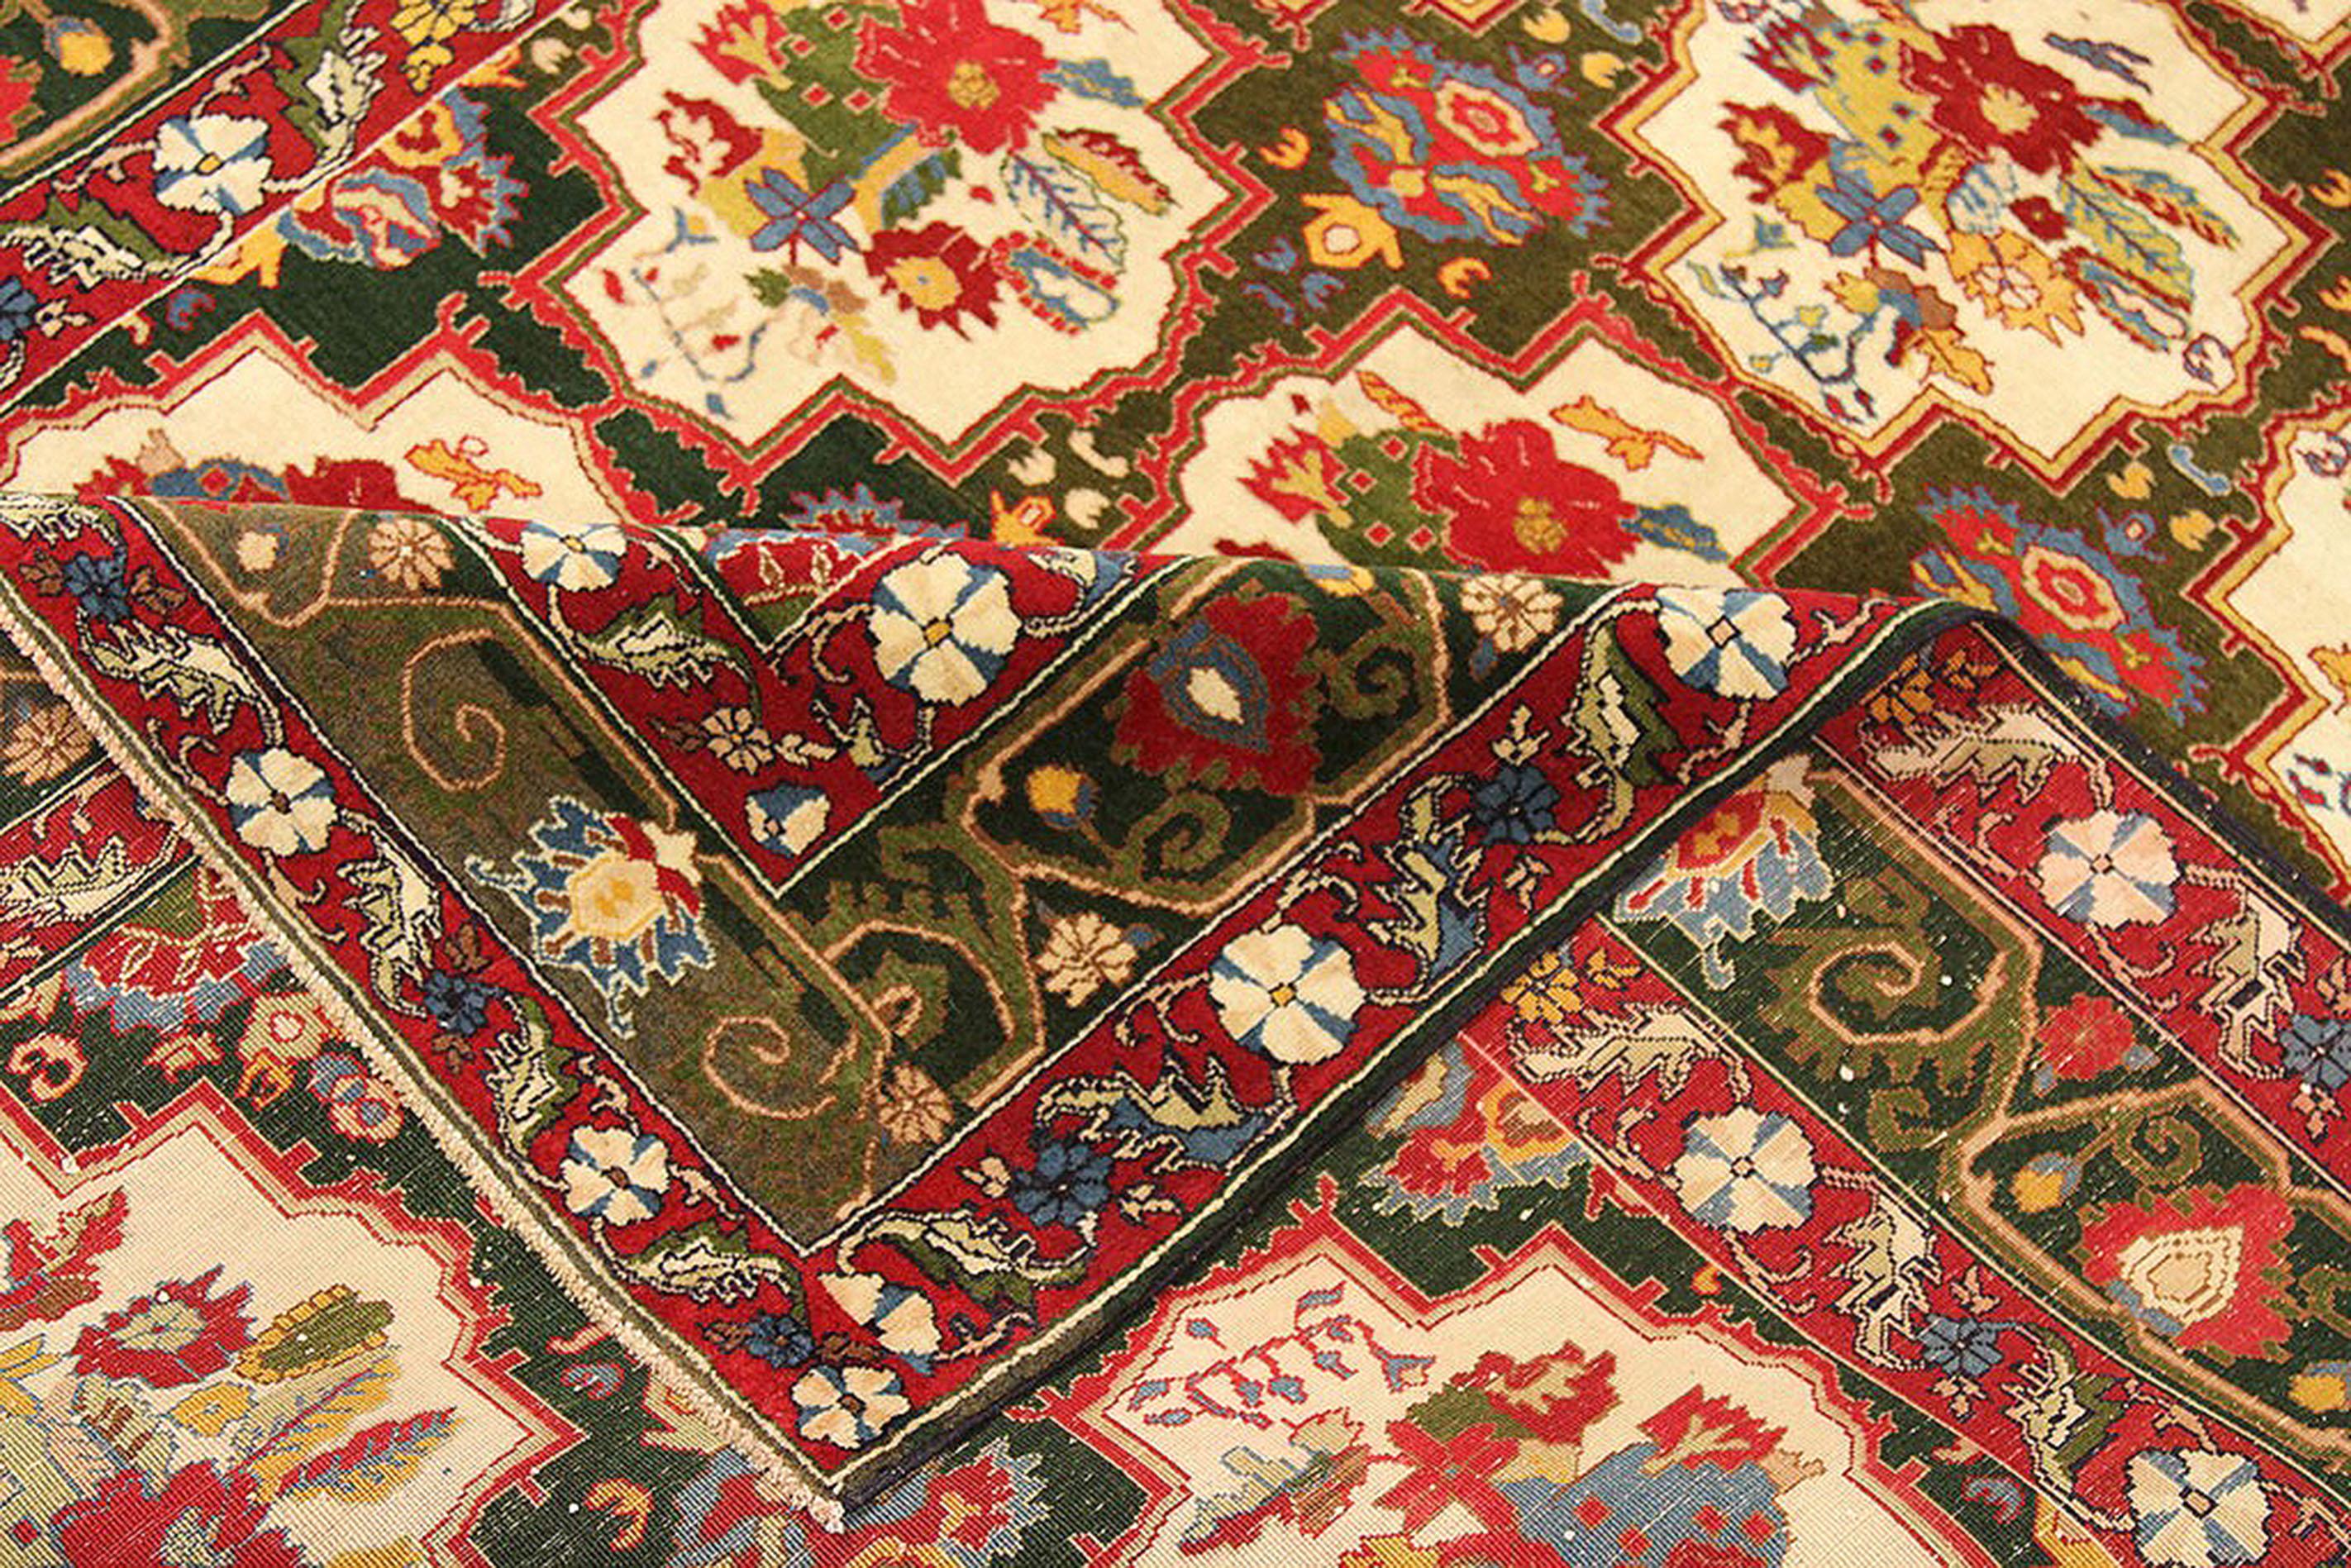 Antique Indian rug handmade from the finest sheep’s wool and colored with all-natural vegetable dyes that are safe for humans and pets. It’s a traditional Indian rug design featuring a lovely mix of a red and black field with gold, blue, red, and